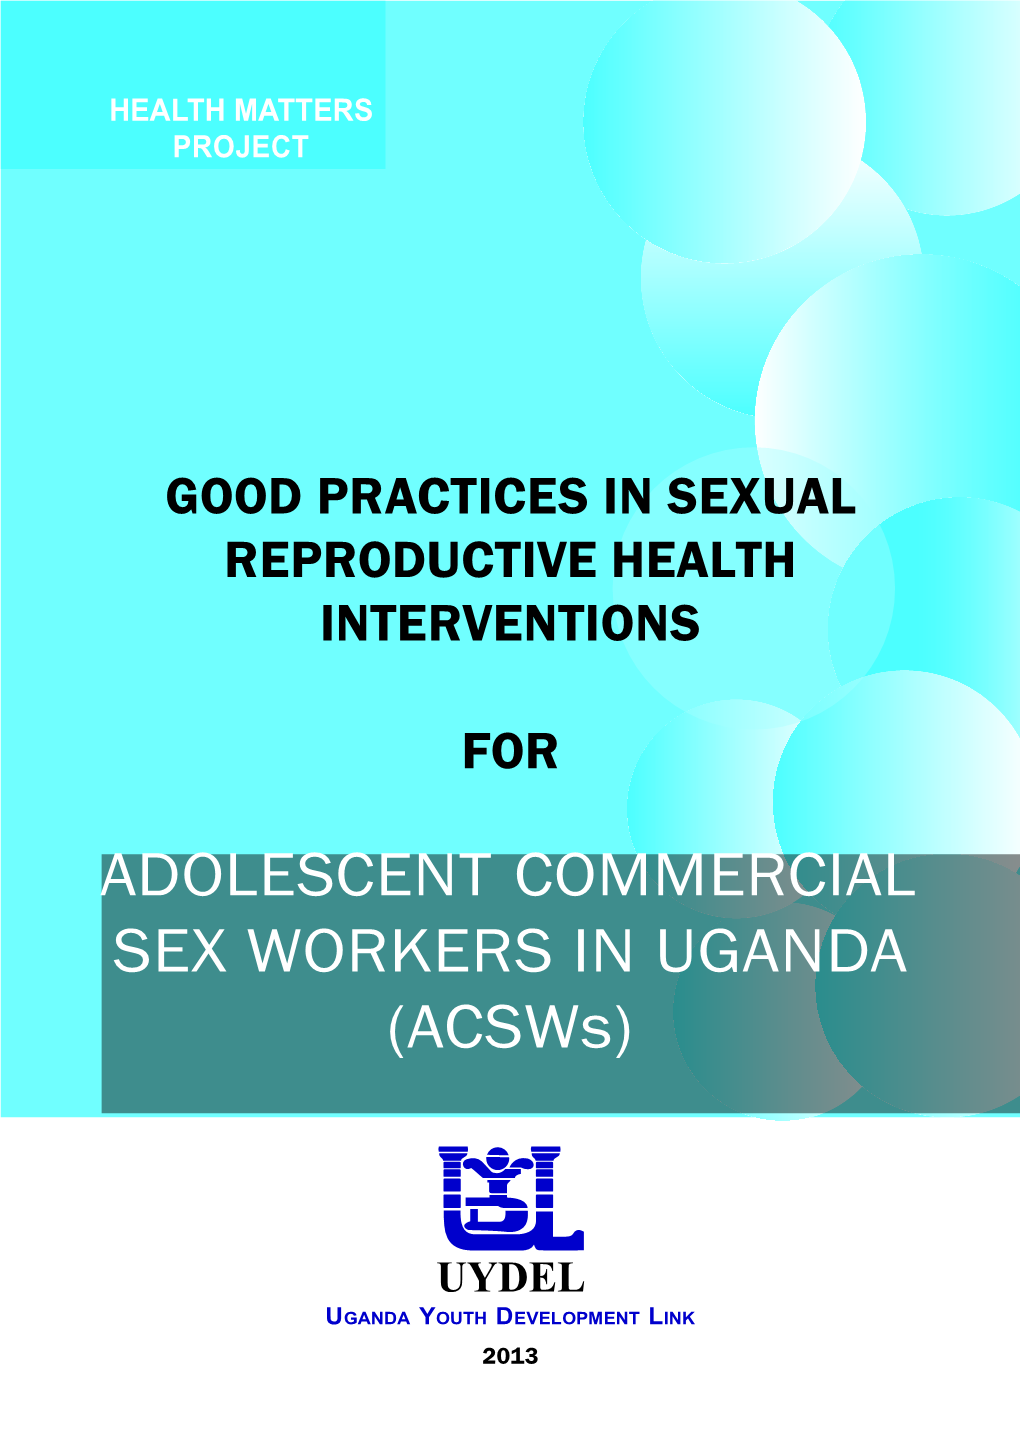 ADOLESCENT COMMERCIAL SEX WORKERS in UGANDA (Acsws)